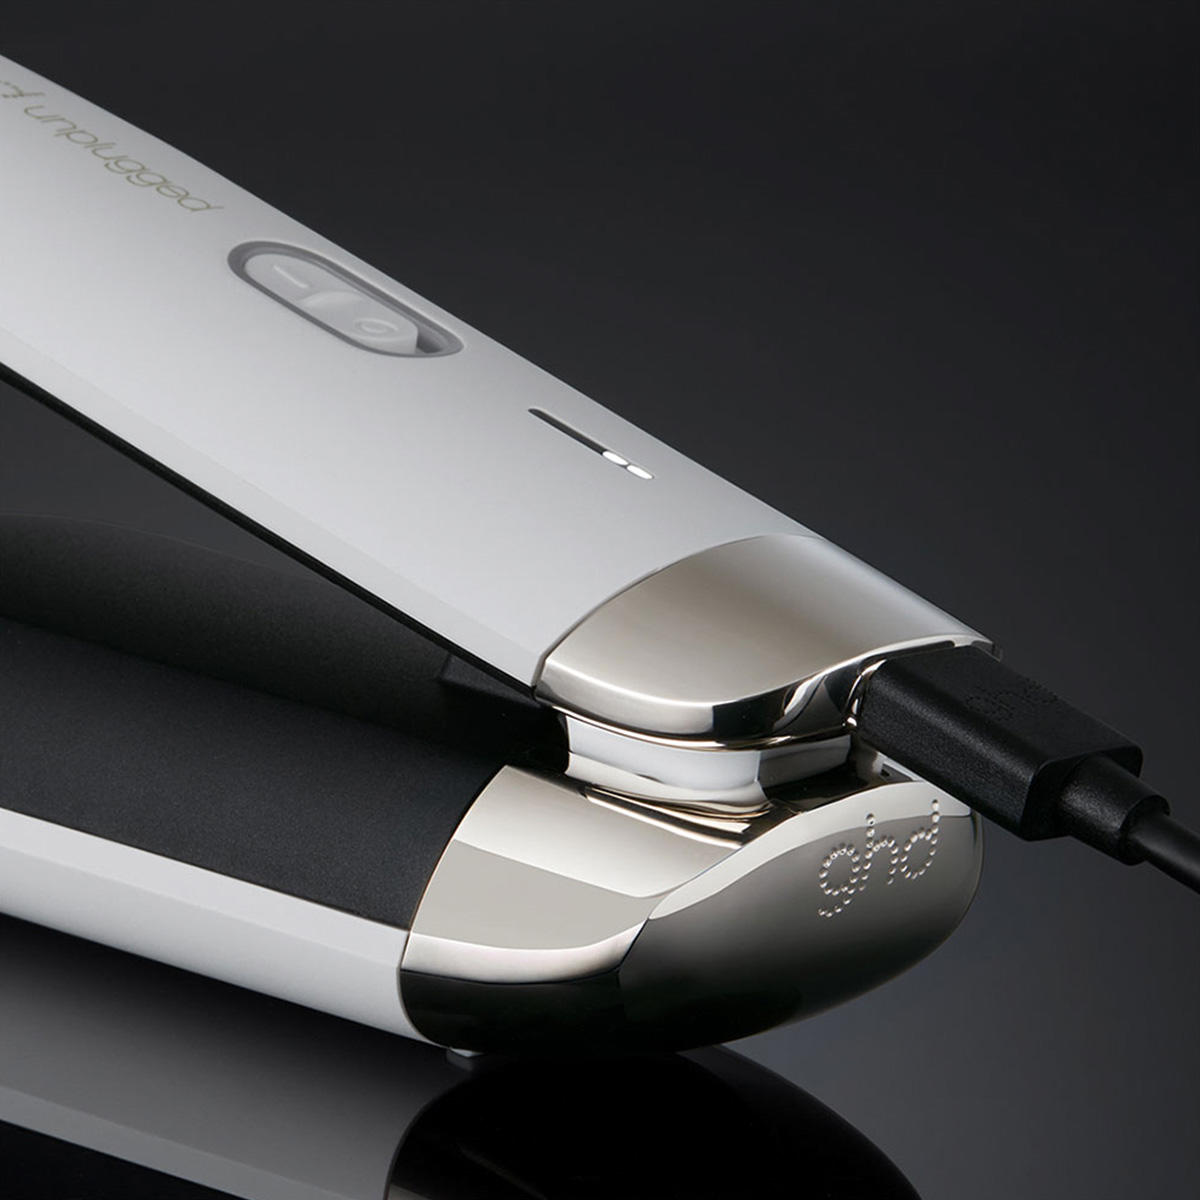 ghd unplugged Styler White - 3